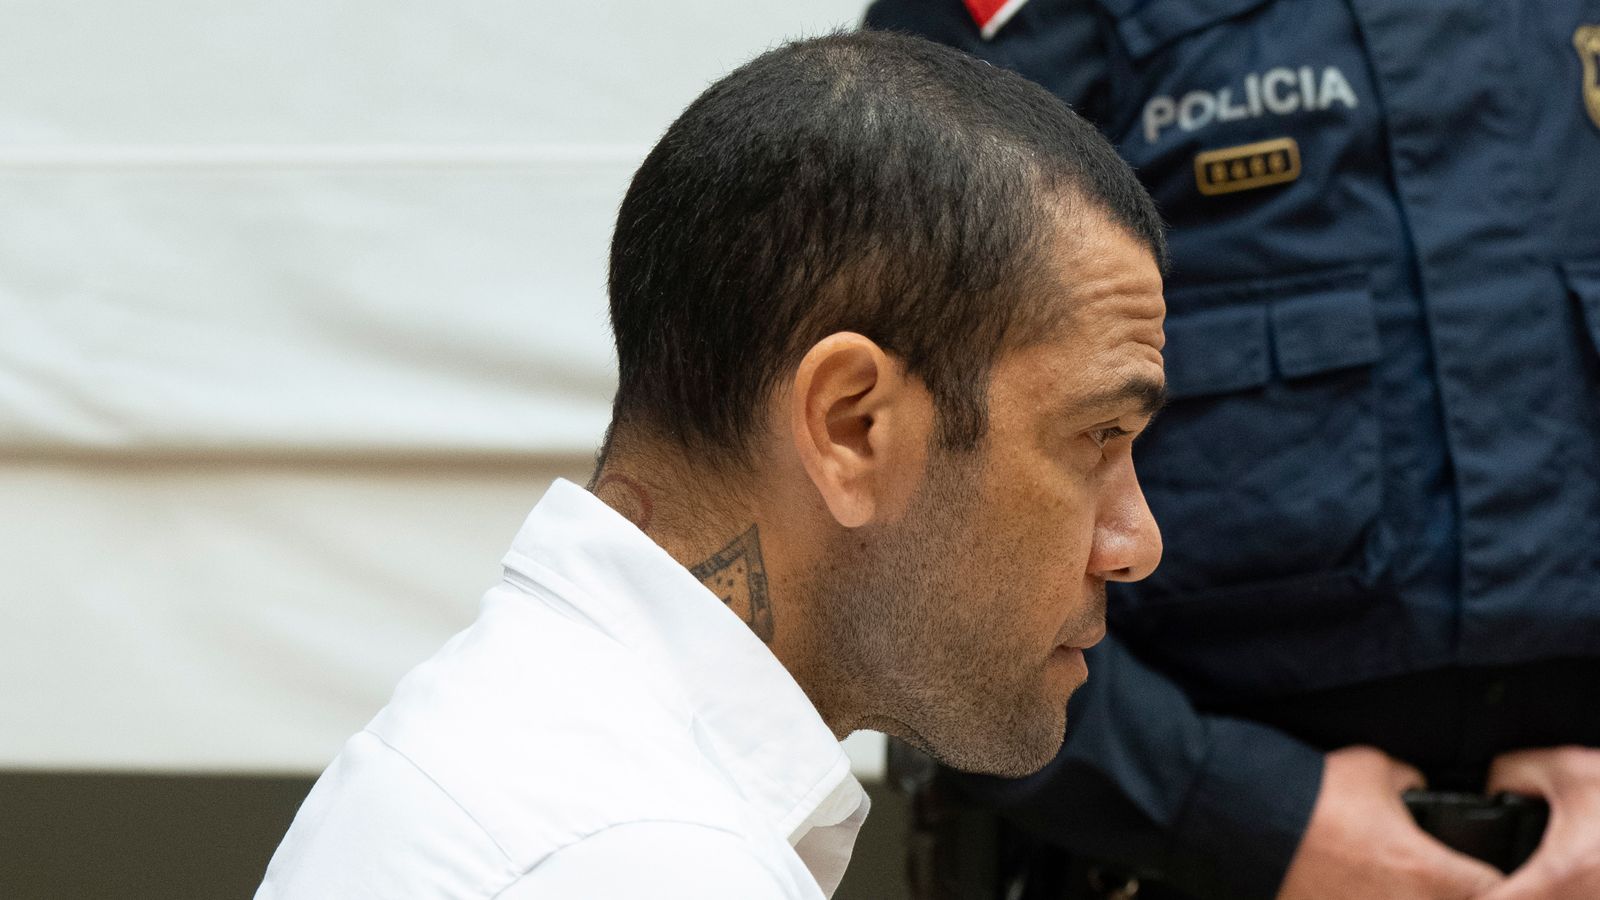 Ex-Barcelona and Brazil defender Dani Alves sentenced to four and a half years in prison after being found guilty of sexual assault